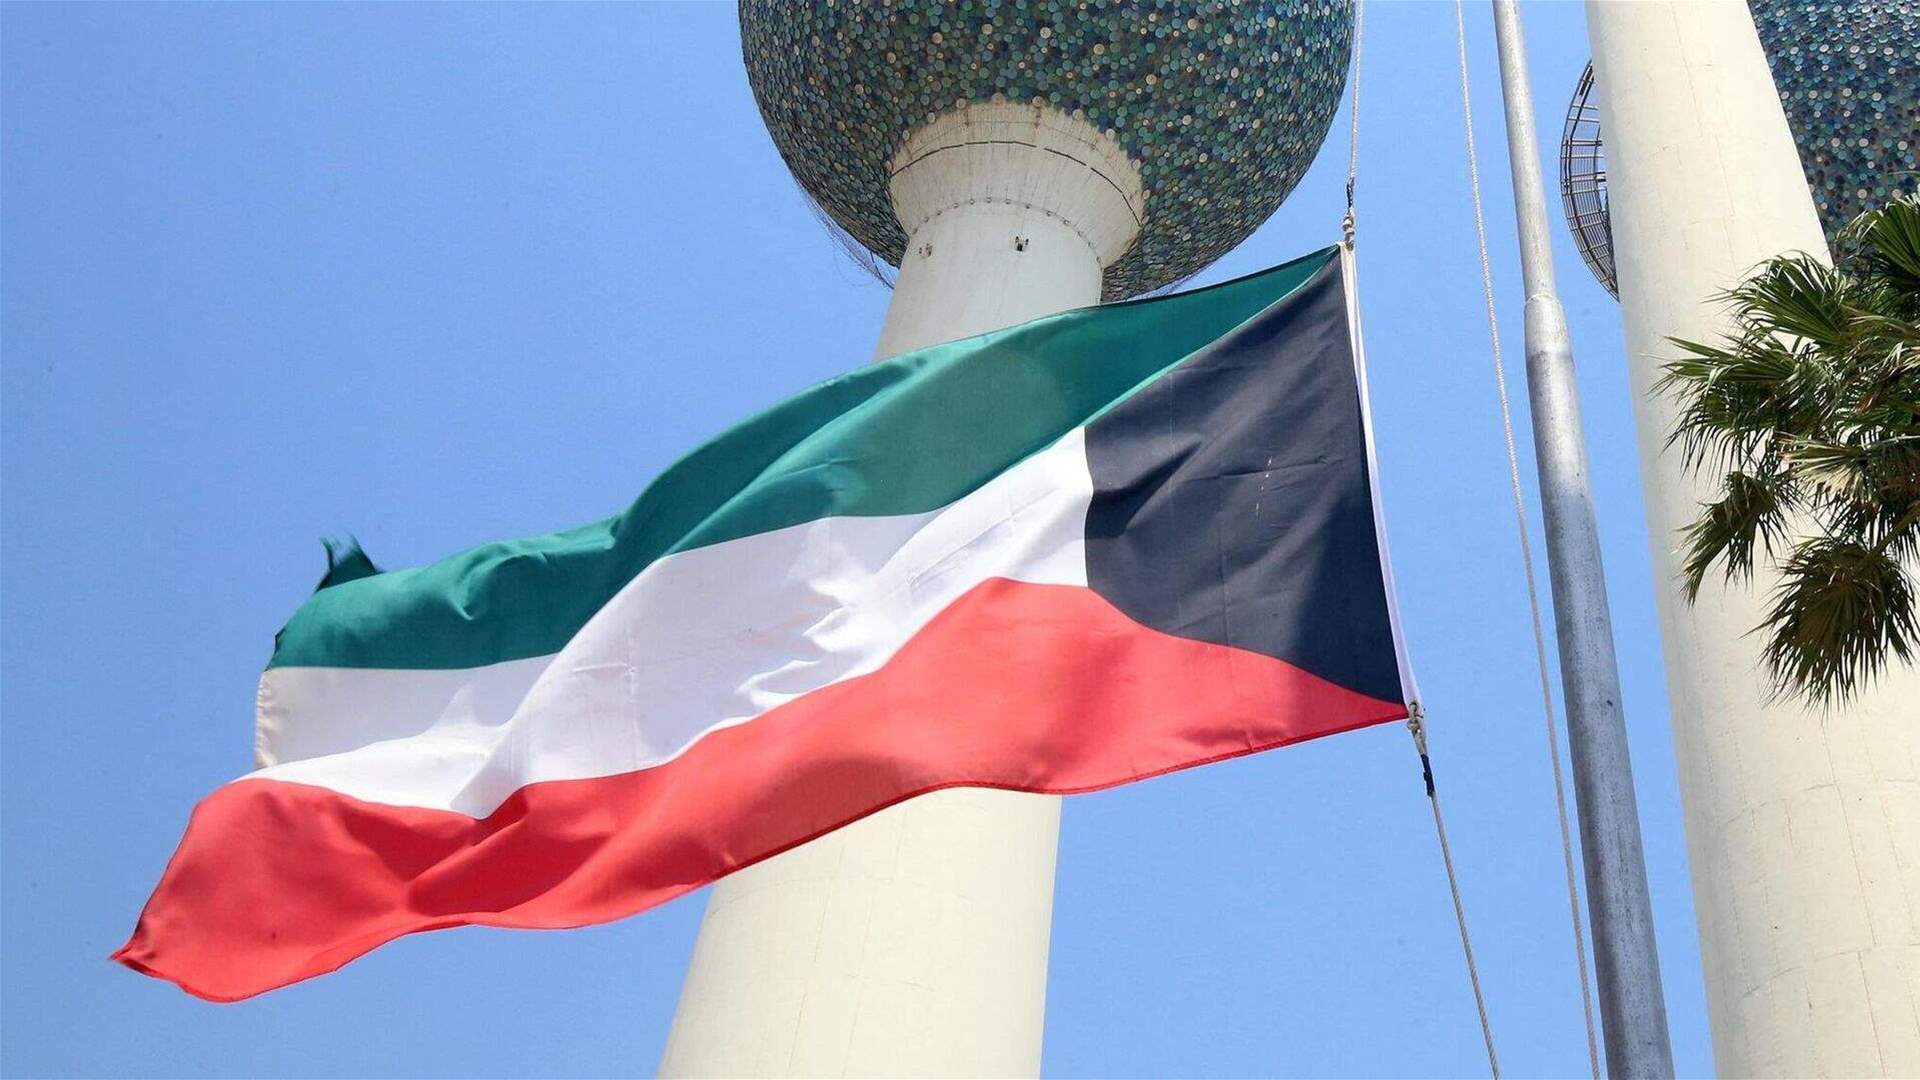 Kuwait calls on its citizens in Lebanon to exercise caution or leave voluntarily